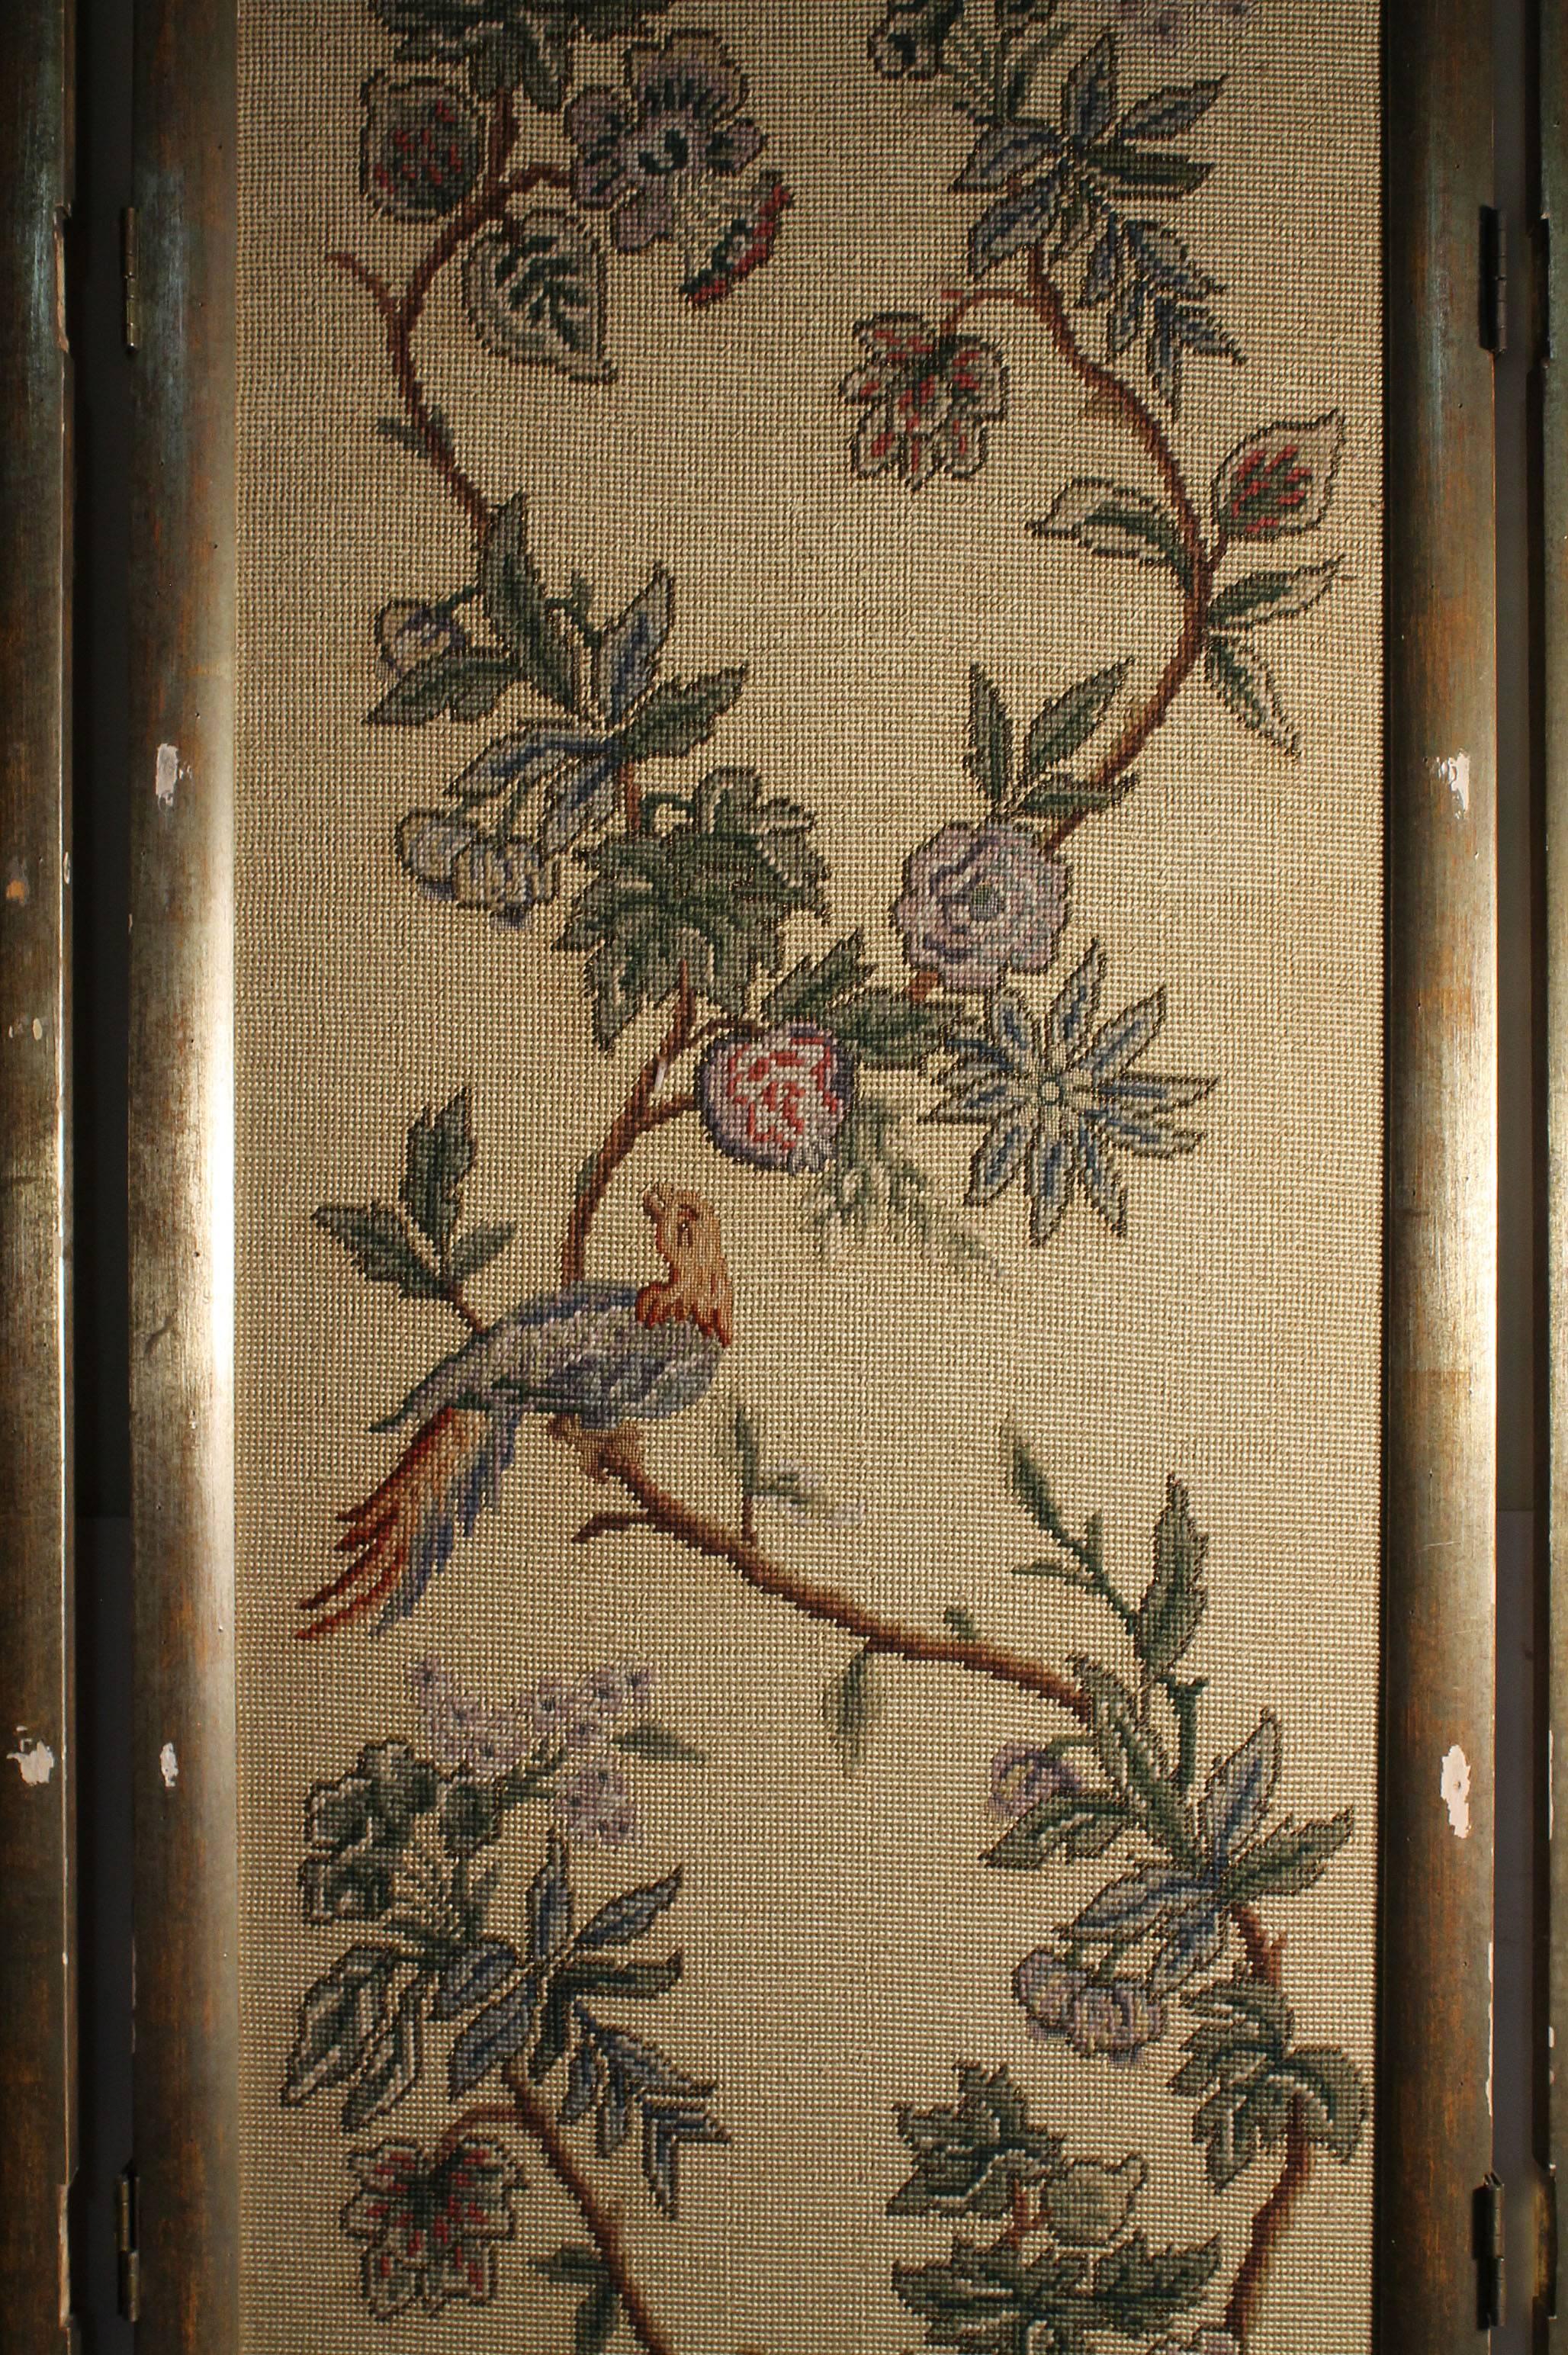 Beautiful vintage Italian chinoiserie or oriental room divider screen with stitched panels of foliage, flowers and birds of different colors. Silver painted sculptural wood frame. Backside is solid fabric color. 
In the manner of James Mont &